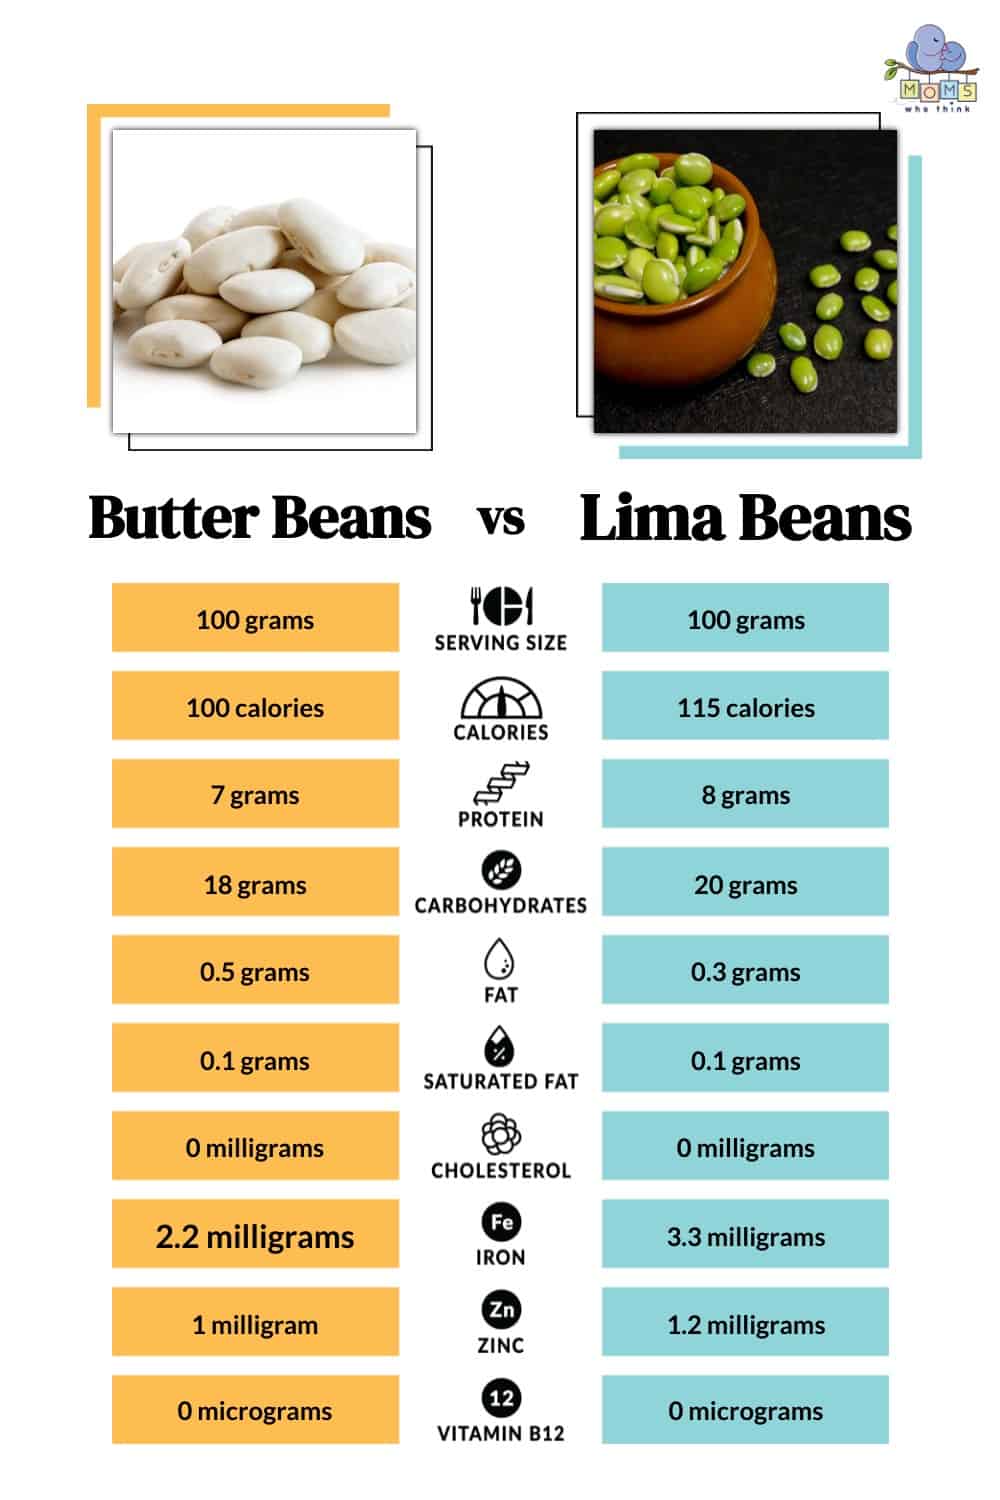 Butter Beans vs Lima Beans Nutritional Facts